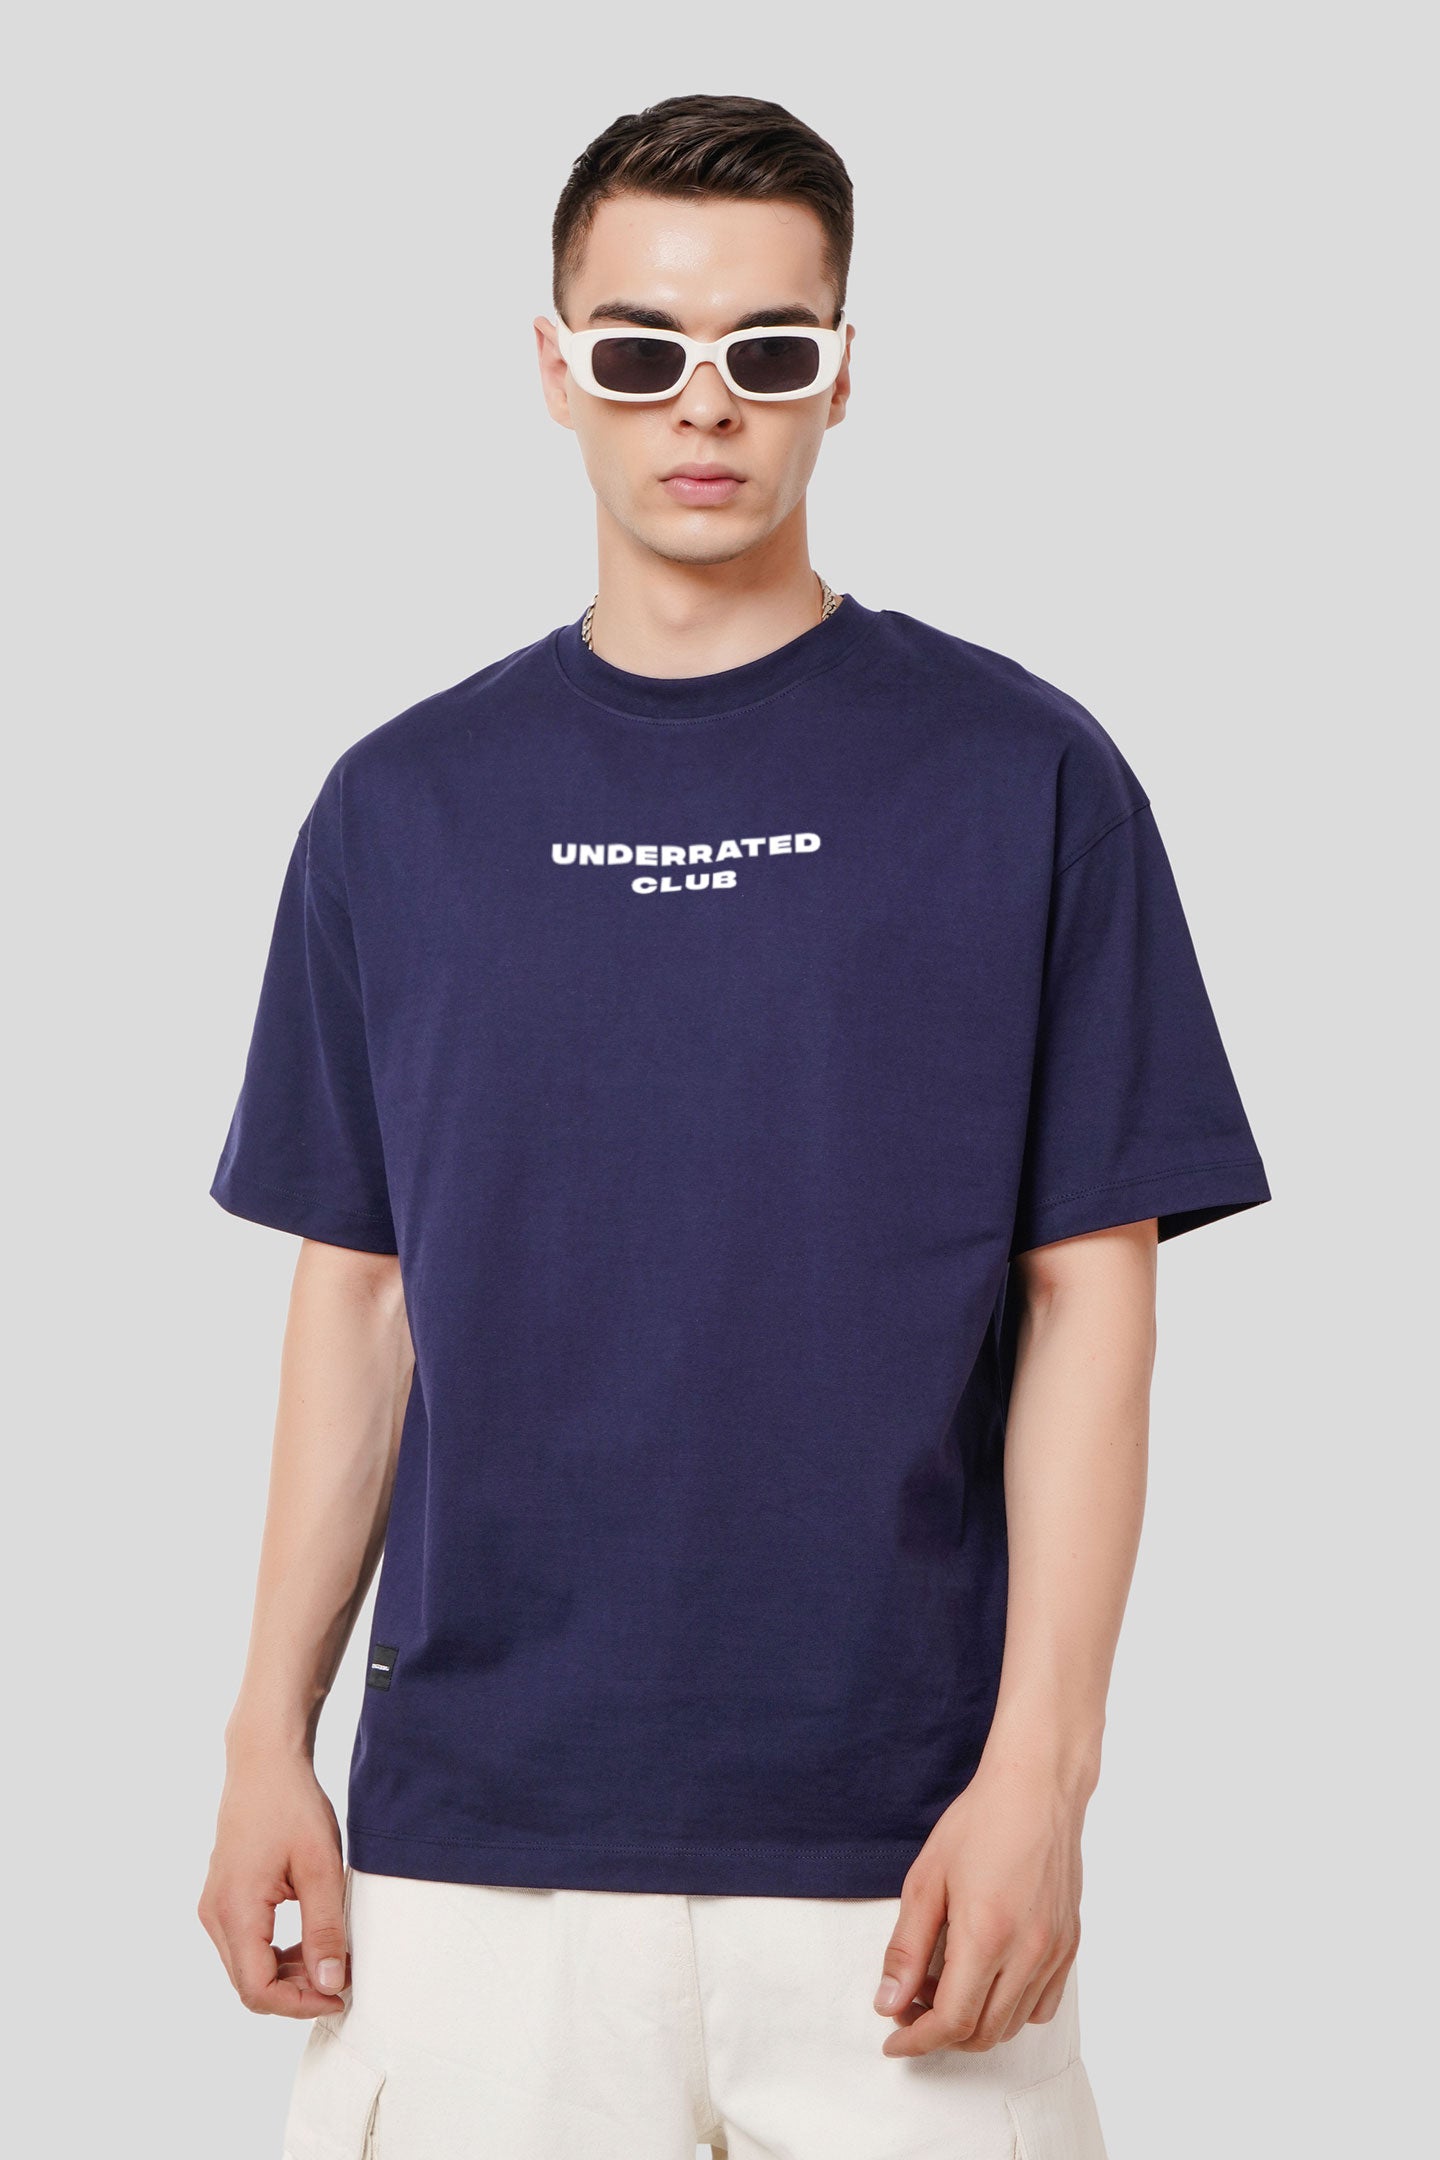 Underrated Vamps Navy Blue Printed T Shirt Men Oversized Fit With Front And Back Design Pic 1